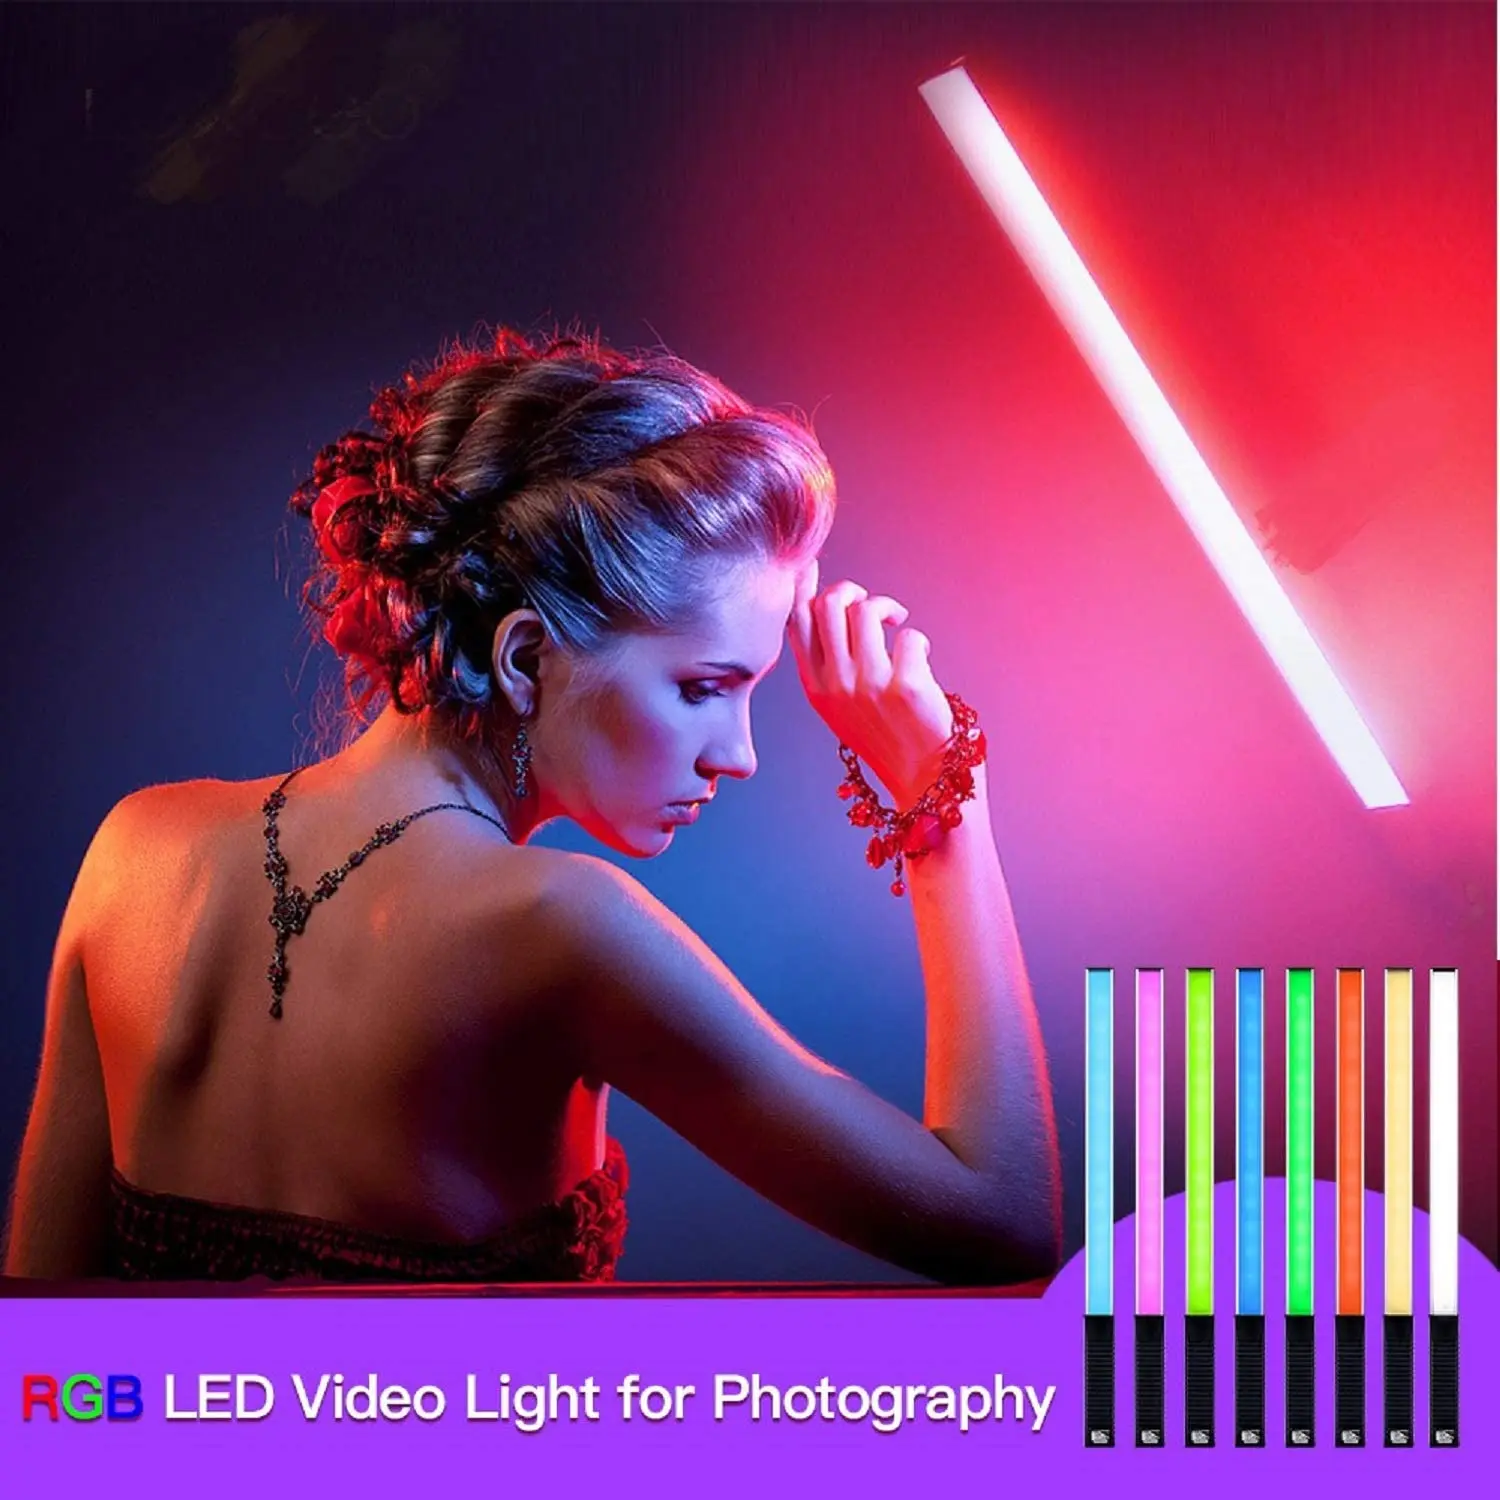 LUXCEO Q508A RGB Led Video Light Wand Tube Photography Lamp Remote Control 8 Color 3000K-5750K Photo Lighting For Youtube TikTok